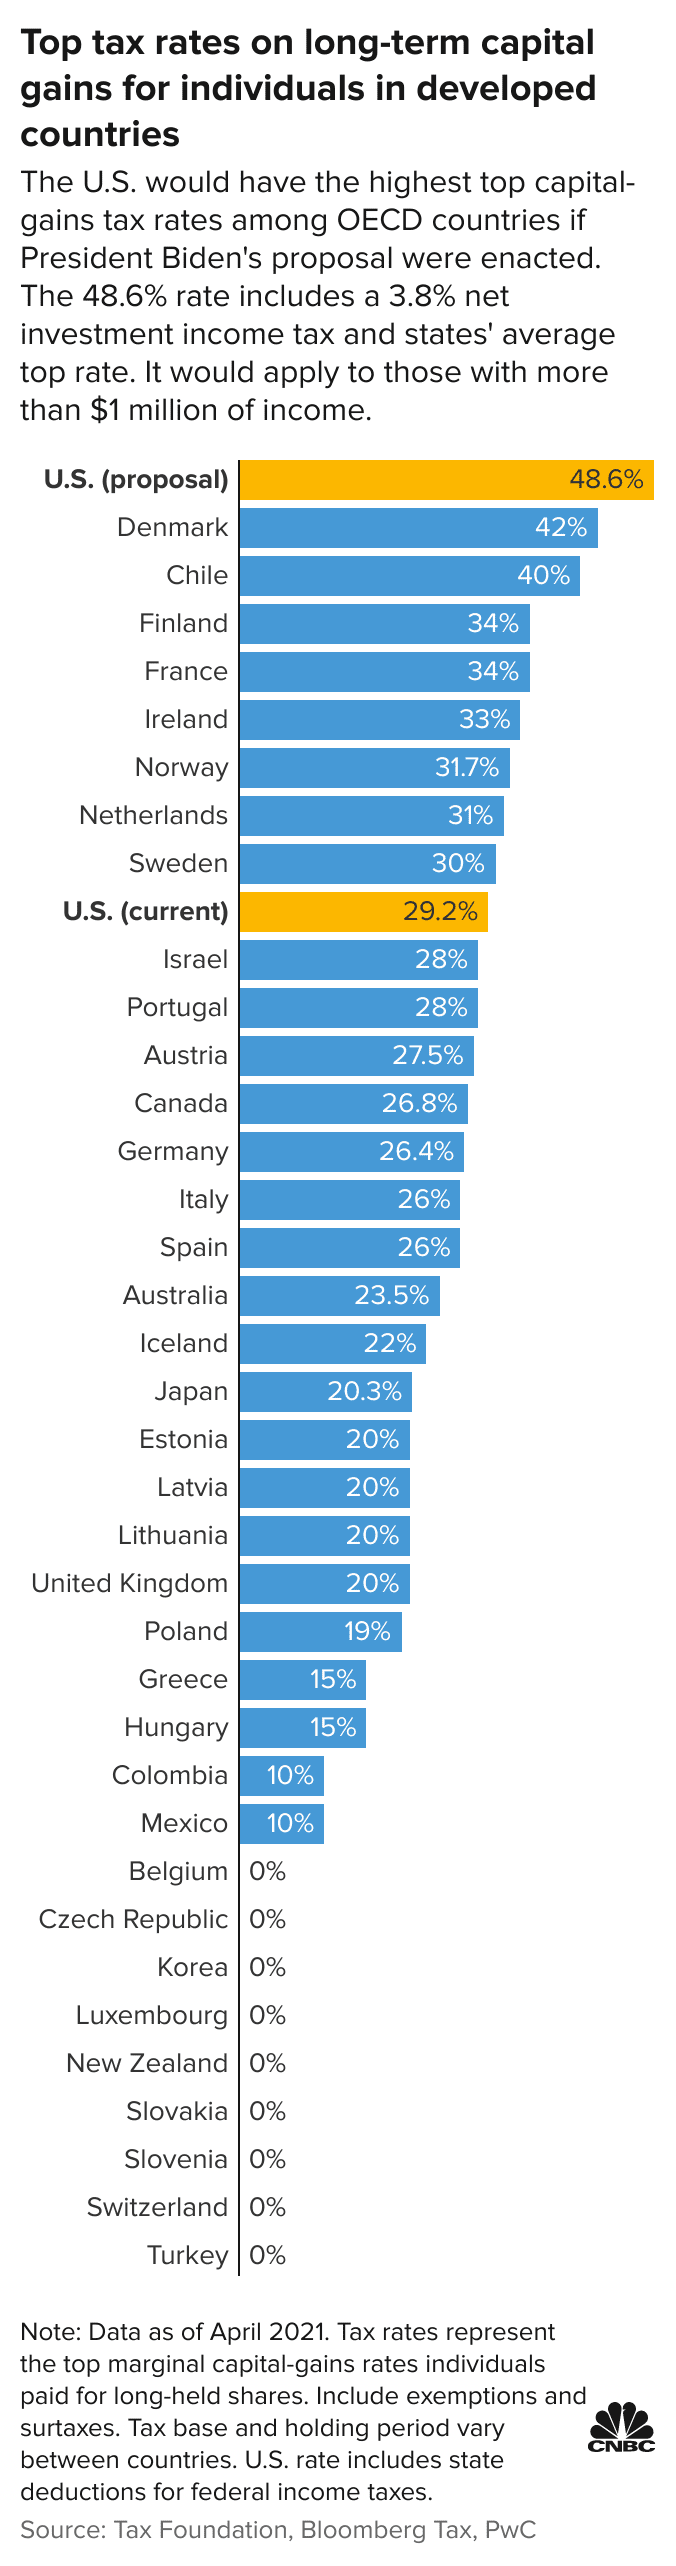 Taxes On Income, Profits And Capital Gains (% Of Revenue) By Country